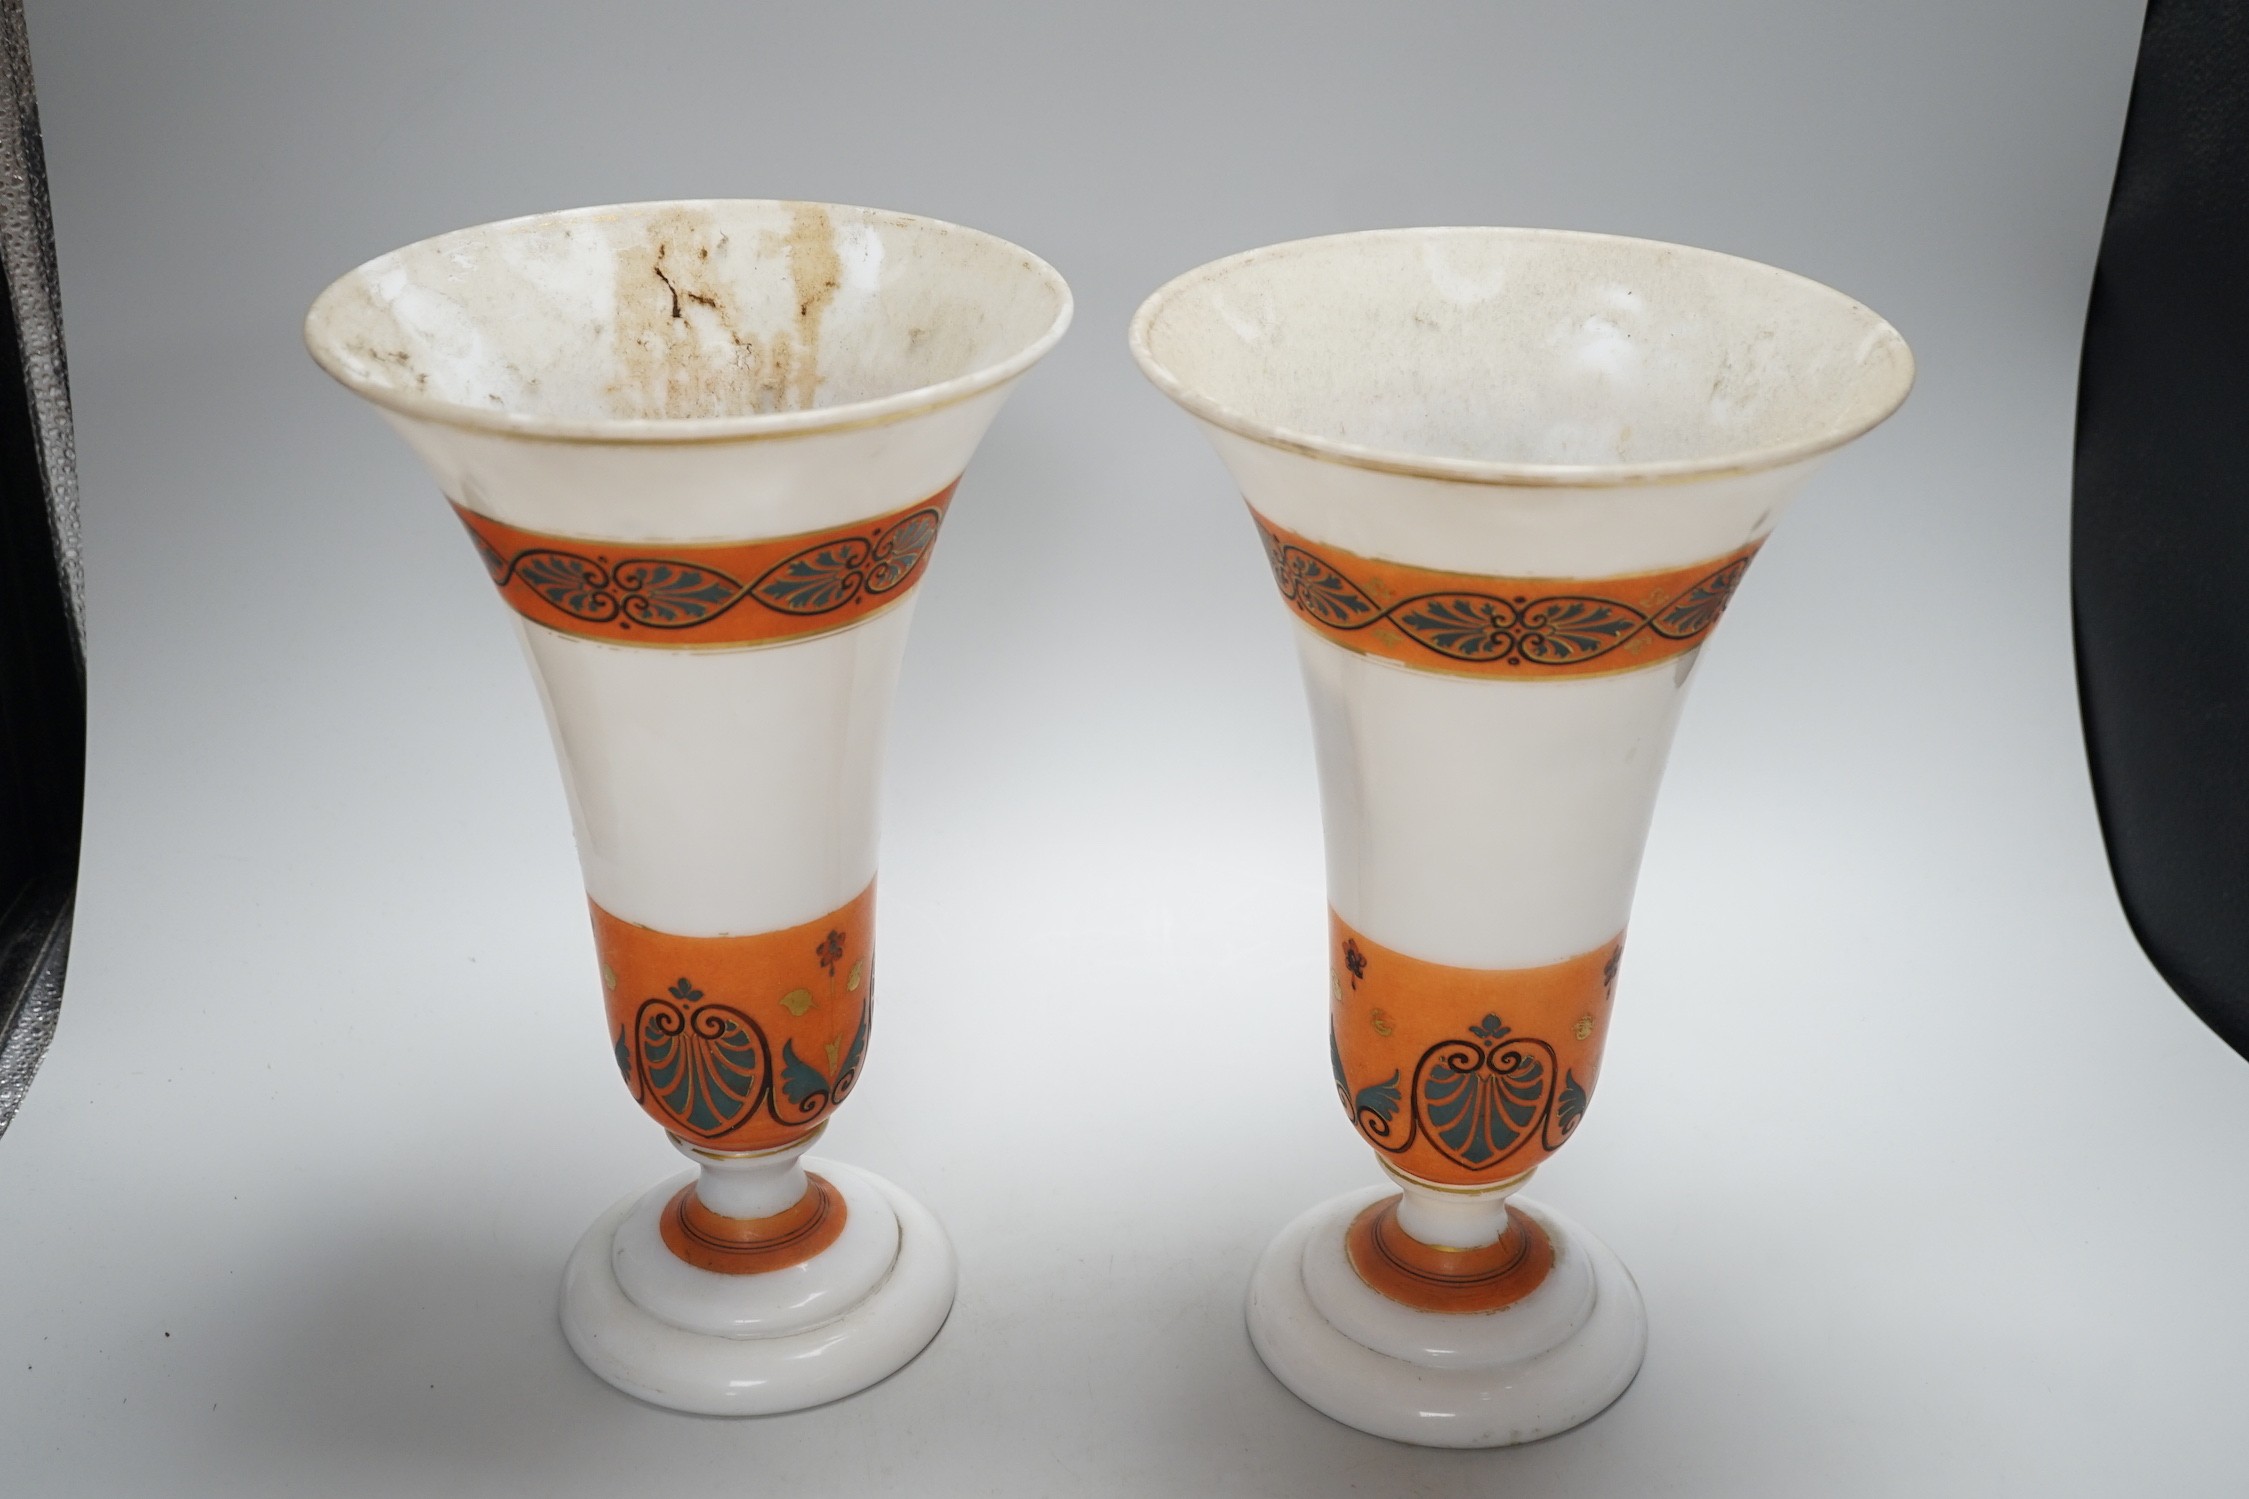 A pair of late 19th century French opaque glass ‘palmette’ vases, with orange decorative bands, 30cms high